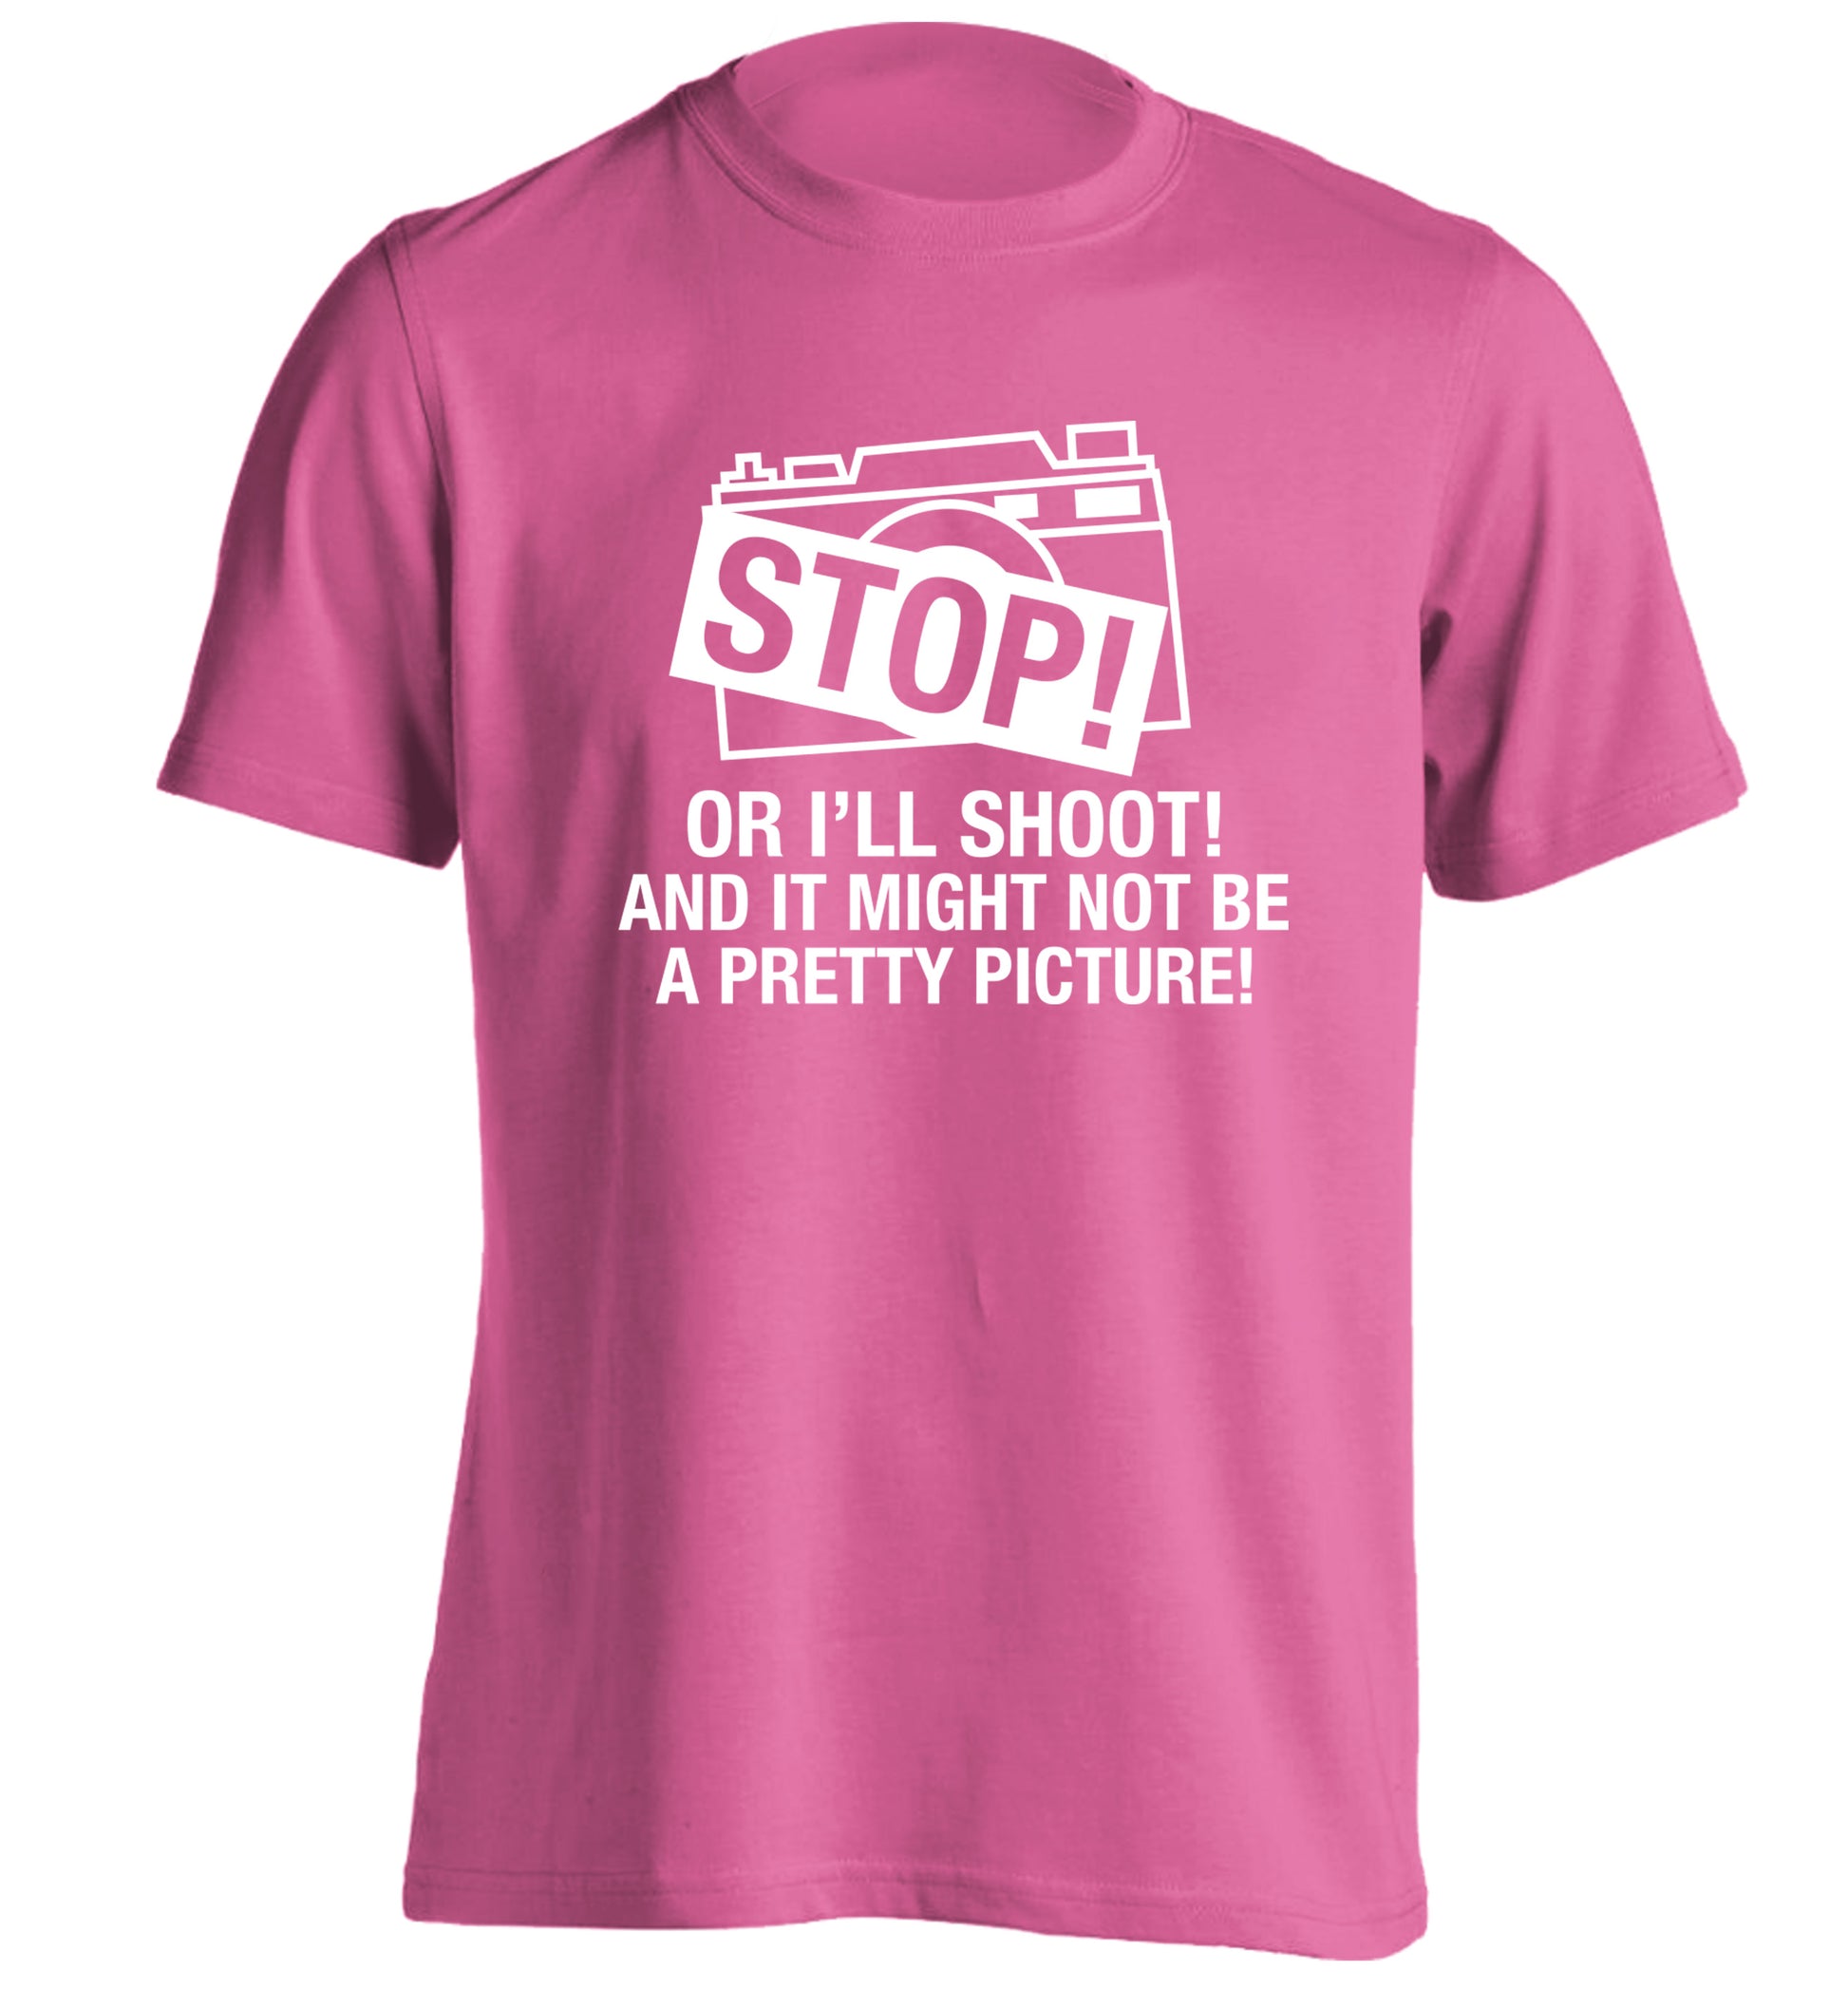 Stop or I'll shoot and it won't be a pretty picture adults unisex pink Tshirt 2XL